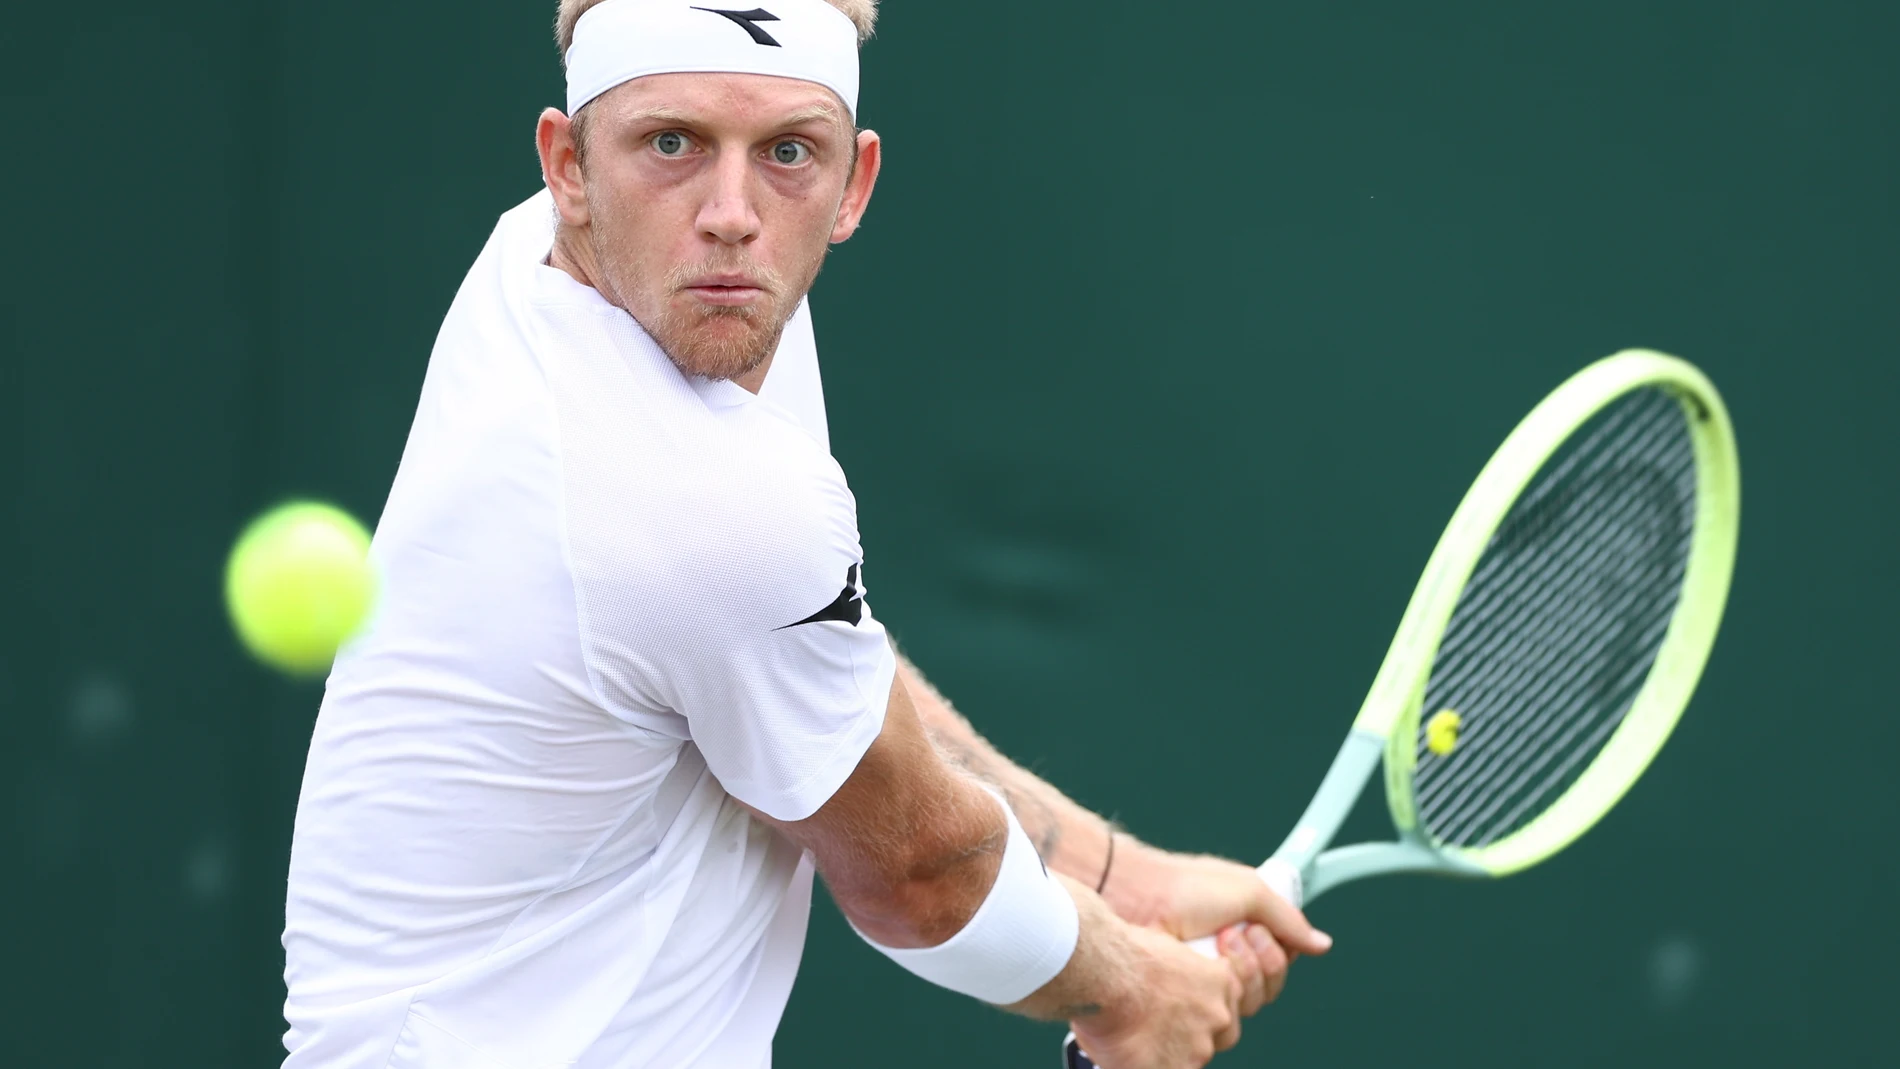 Wimbledon (United Kingdom), 06/07/2023.- Alejandro Davidovich Fokina of Spain in action during his Men's Singles 1st round match against Arthur Fils of France at the Wimbledon Championships, Wimbledon, Britain, 06 July 2023. (Tenis, Francia, España, Reino Unido) EFE/EPA/ADAM VAUGHAN EDITORIAL USE ONLY 